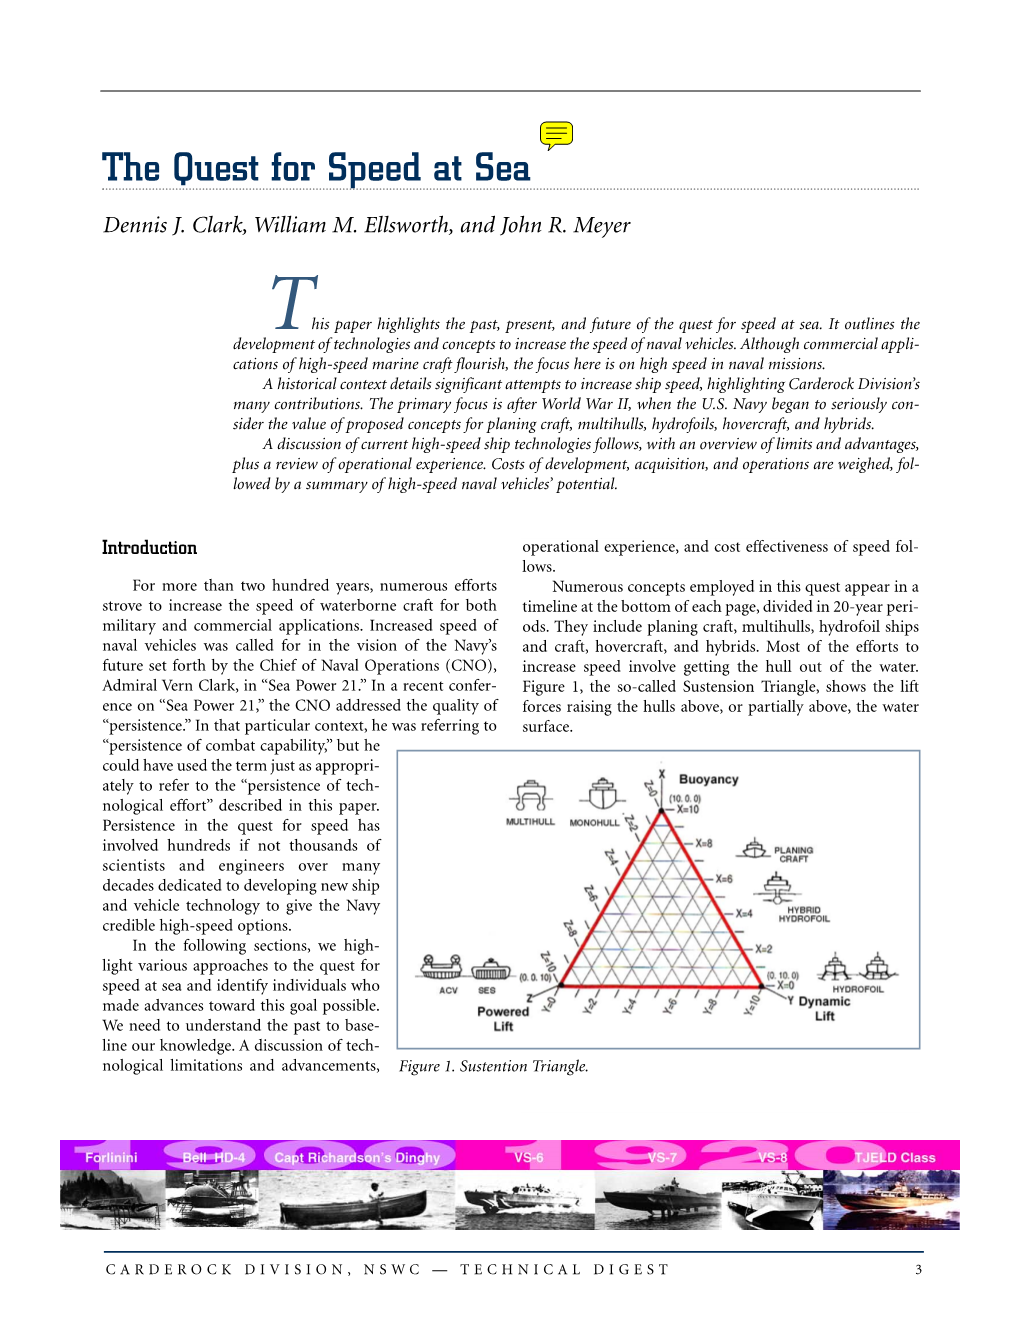 The Quest for Speed at Sea